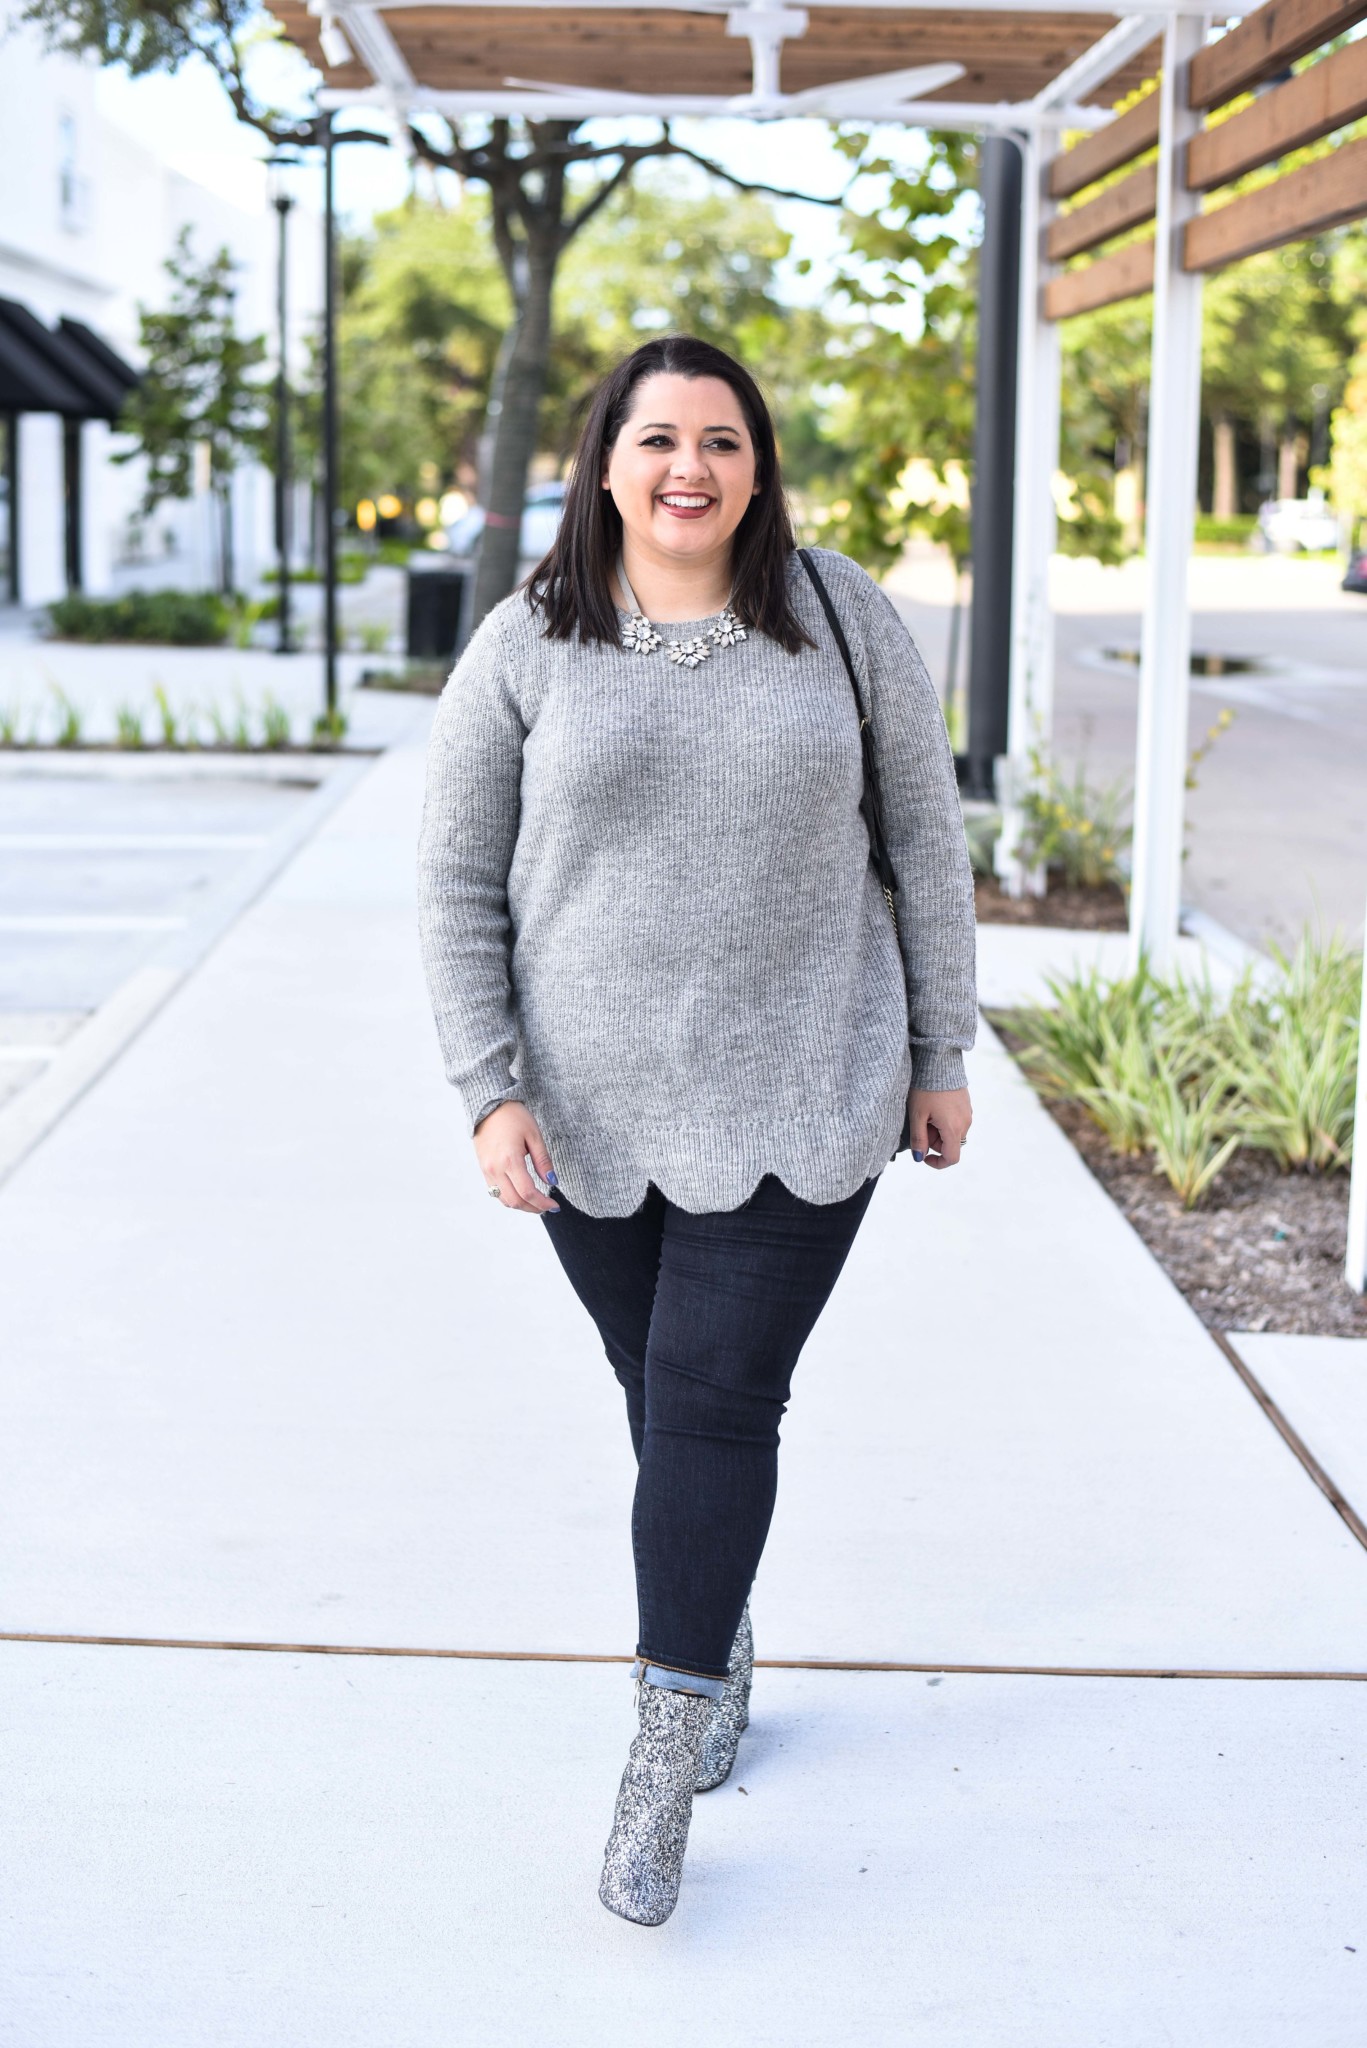 Scallop Hem Sweater from Lane Bryant - currently 40% off during Cyber Week